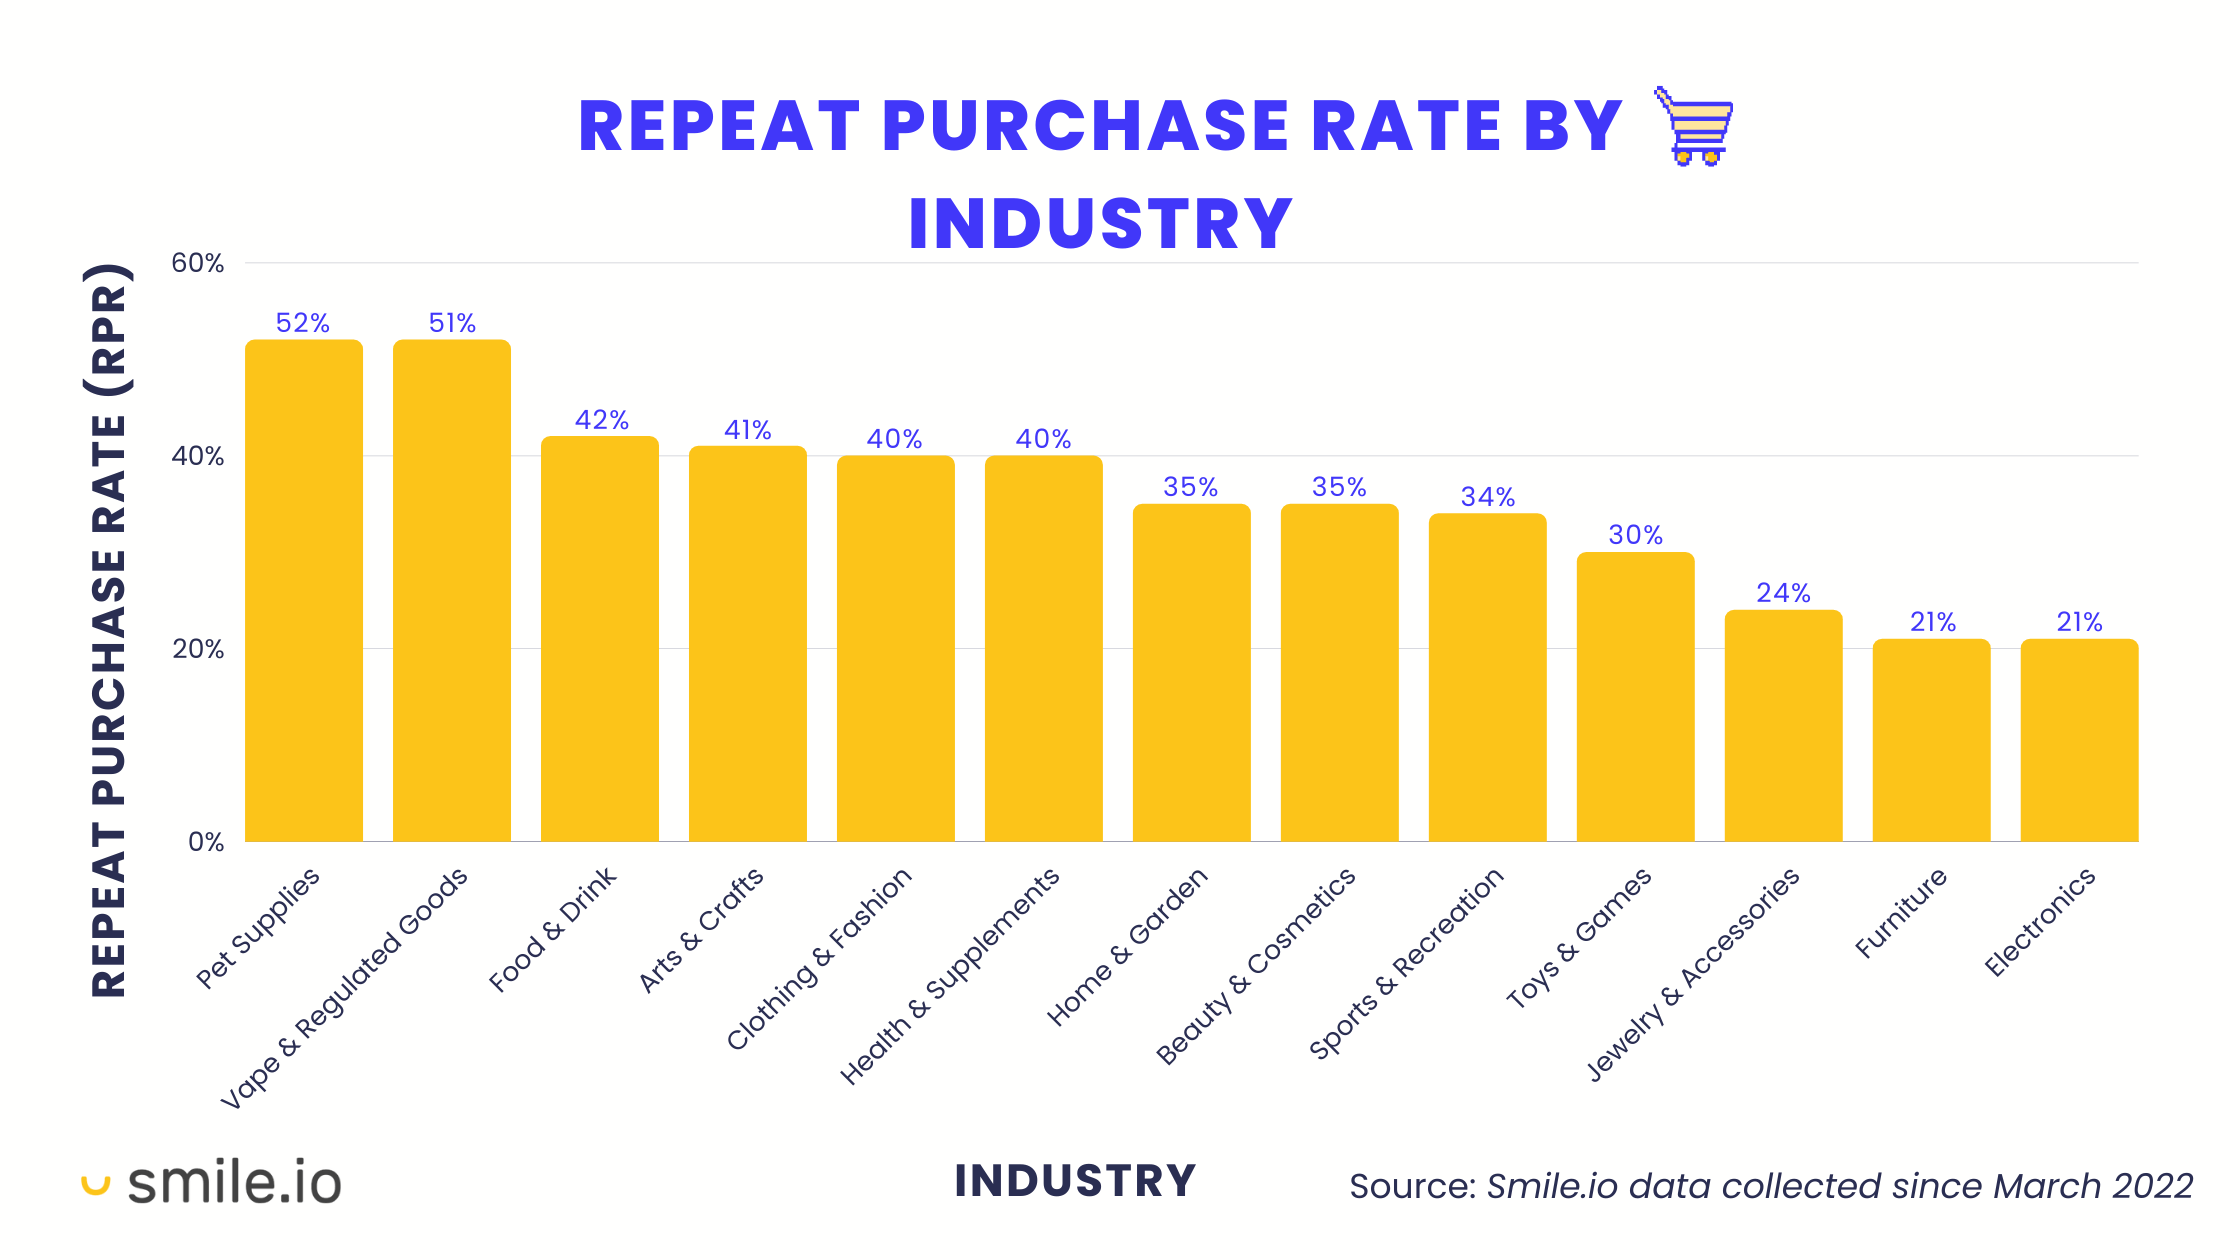 Increase Purchase Frequency–A bar chart displaying the repeat purchase rate for 13 different industries collected from 100K Smile merchants from March 2022 to March 2023.